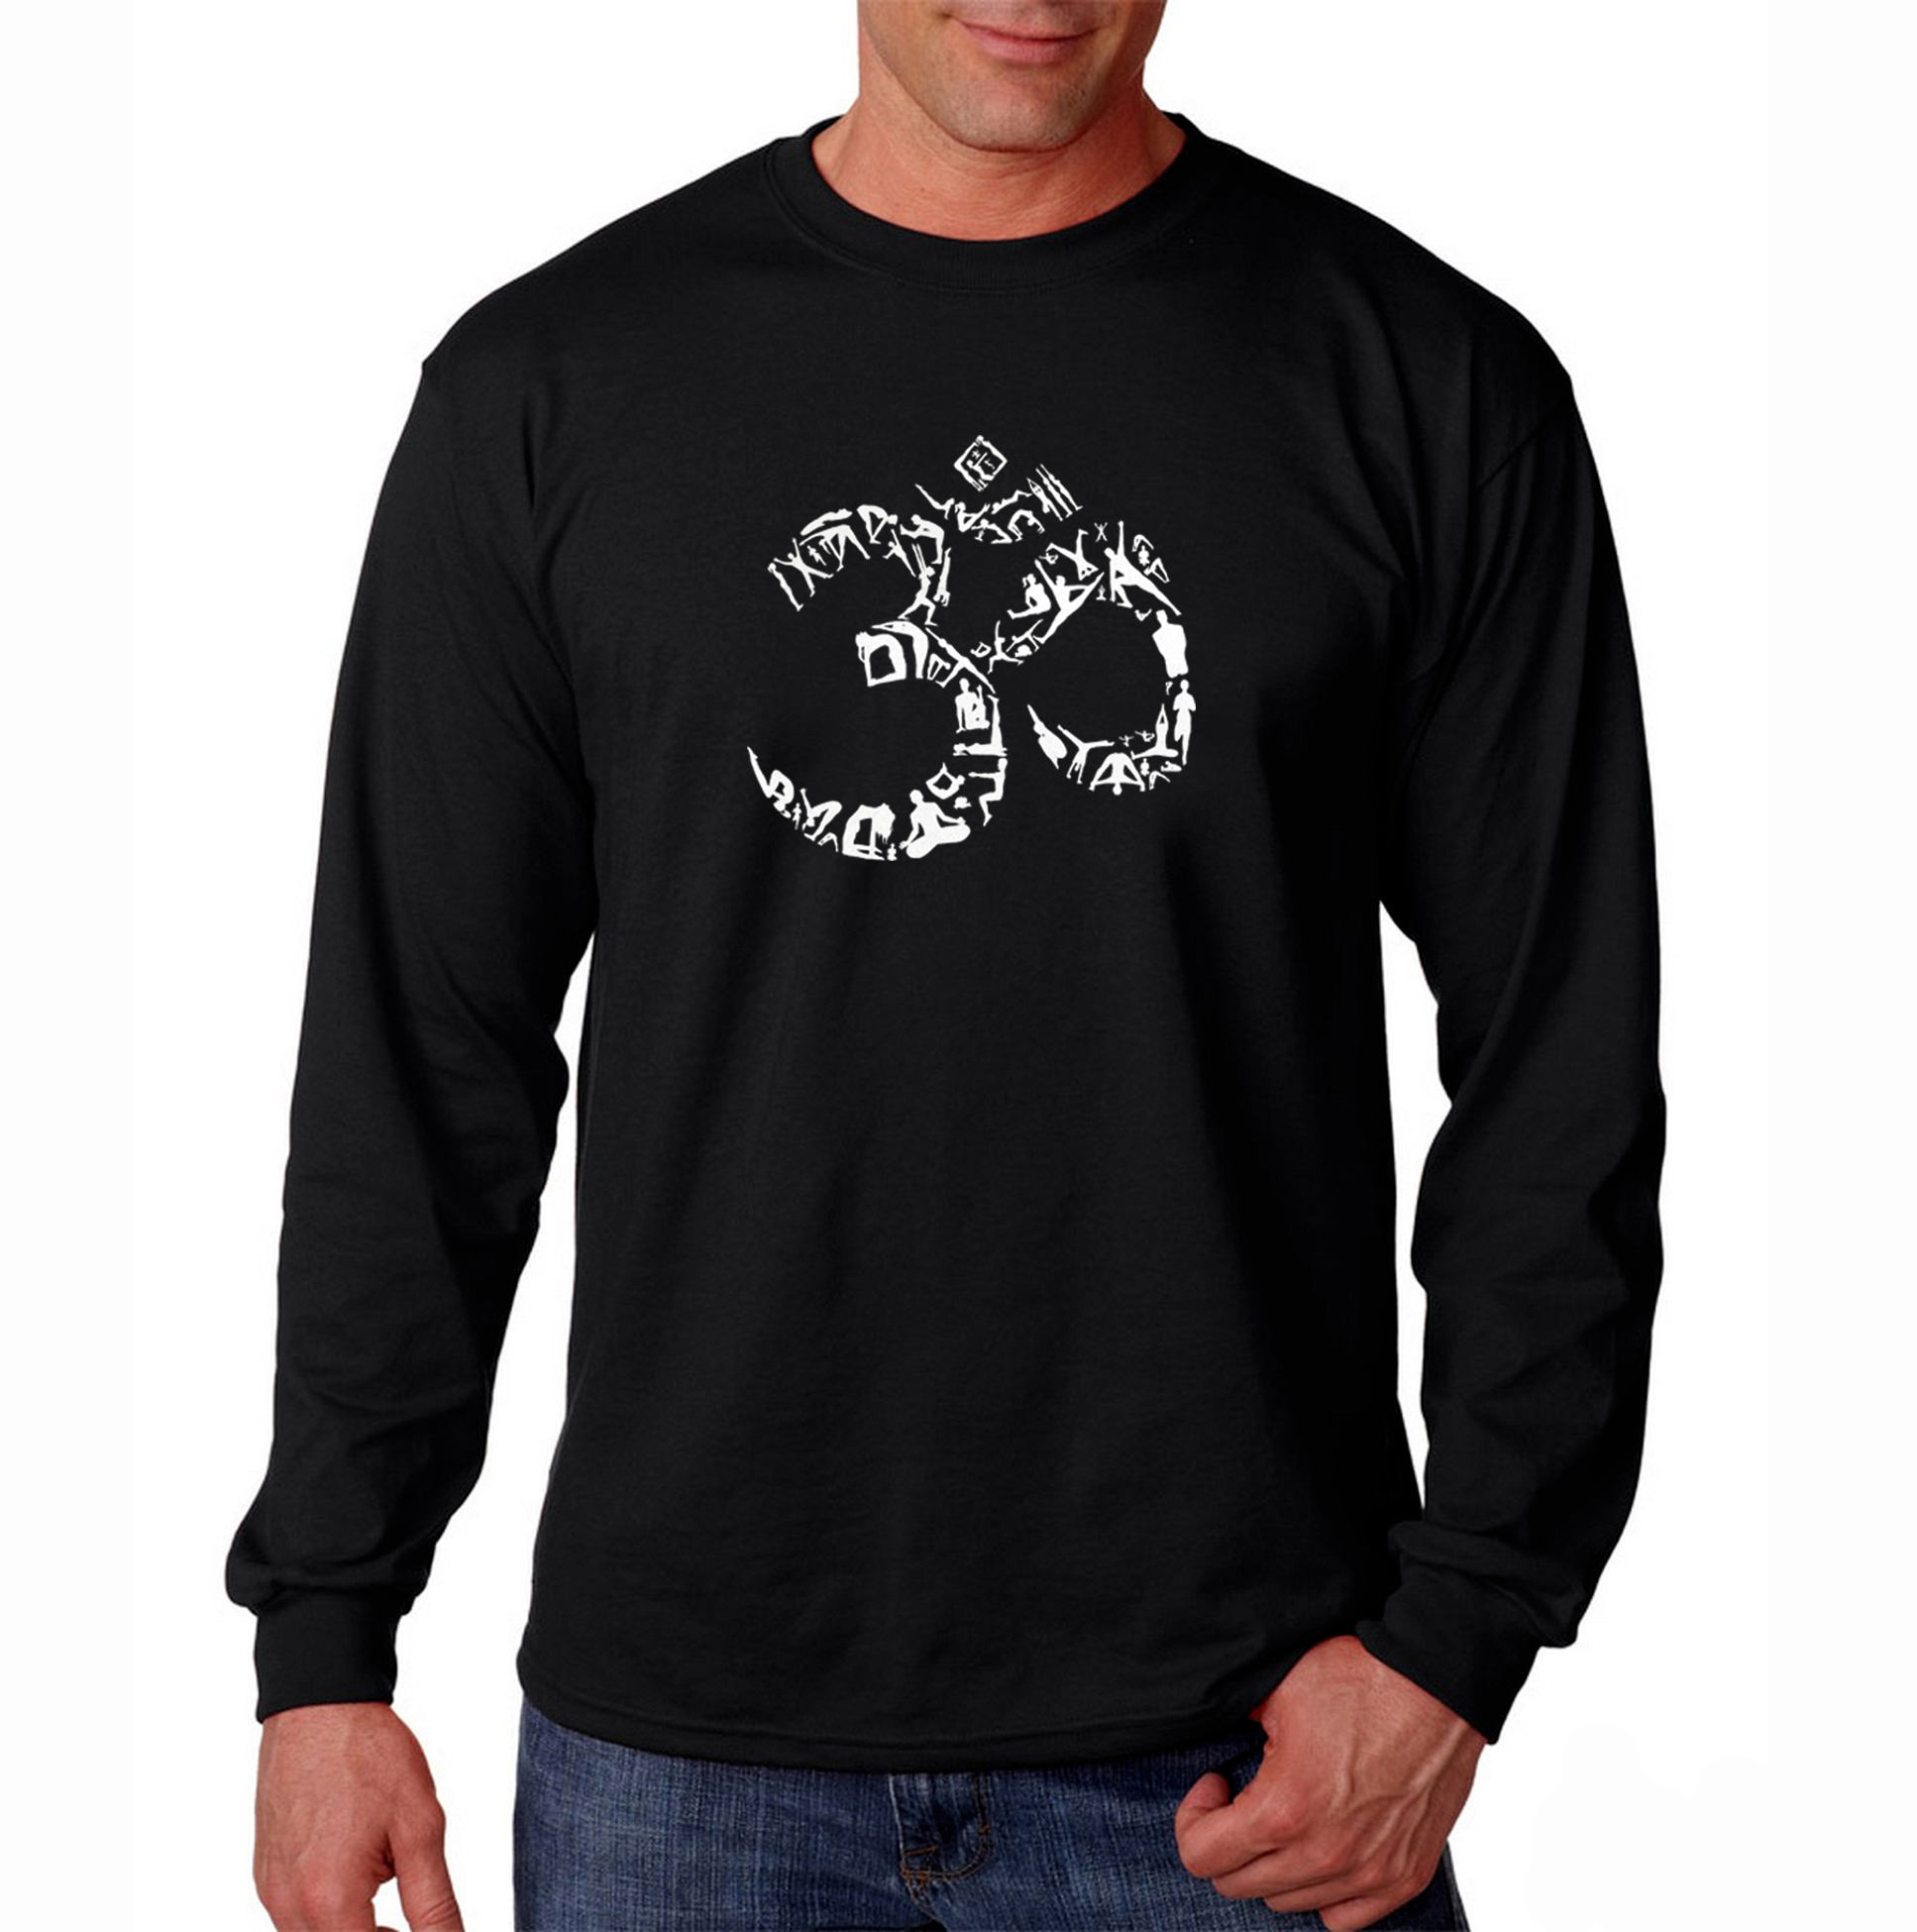 Los Angeles Pop Art Men's Big & Tall  Word Art Long Sleeve T-Shirt - The Om Symbol out of Yoga Poses